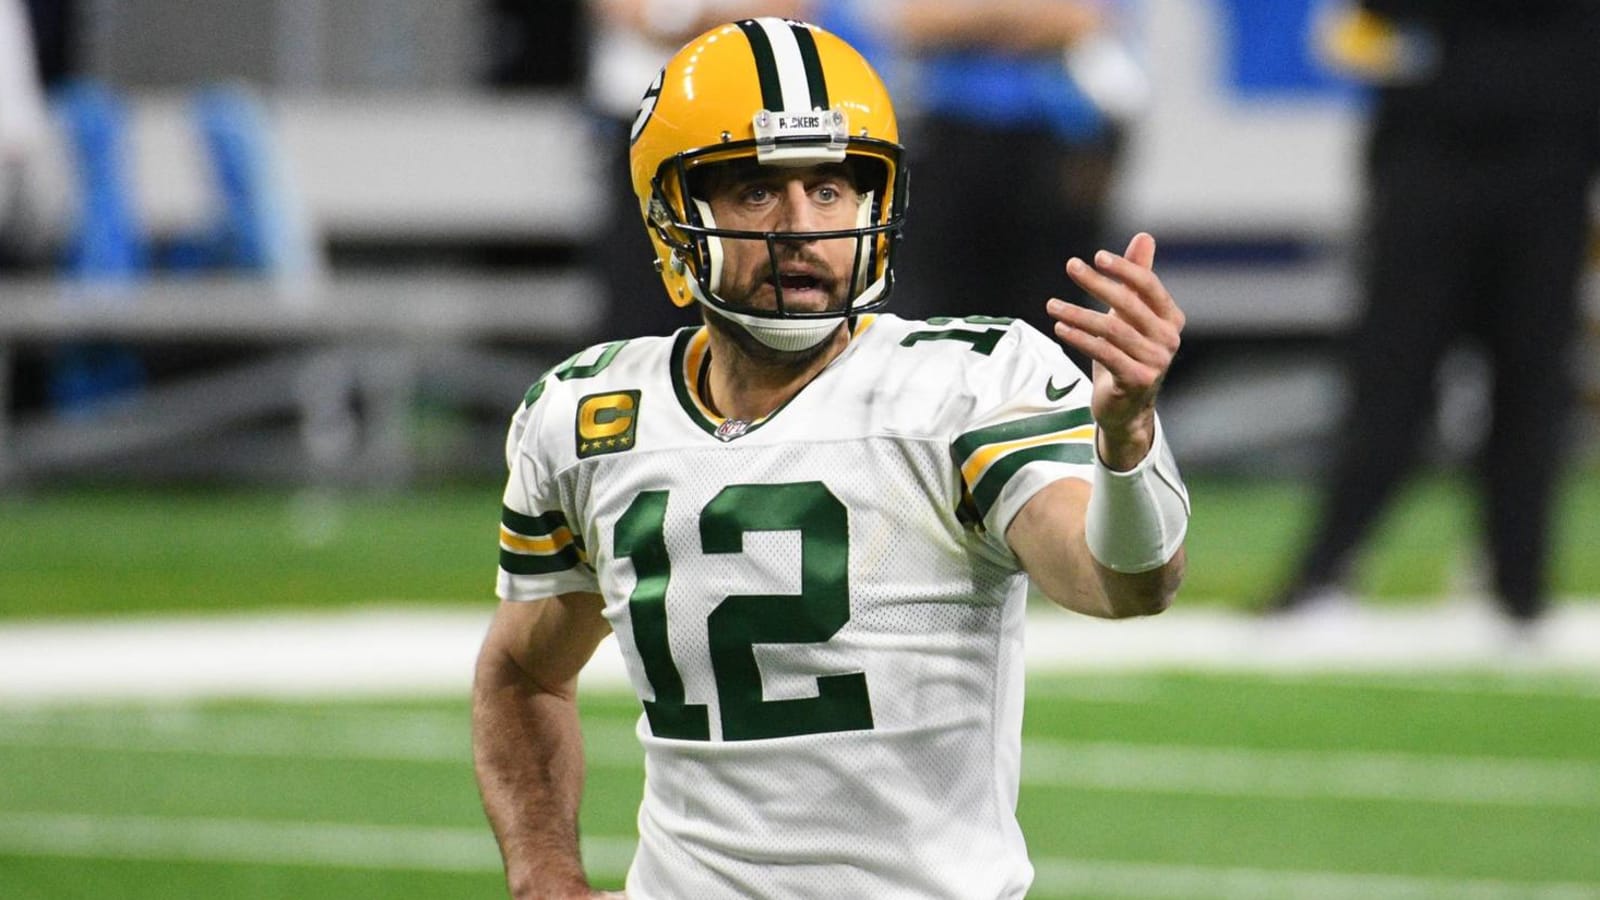 Report: Packers releasing Kumerow 'drove Rodgers nuts'